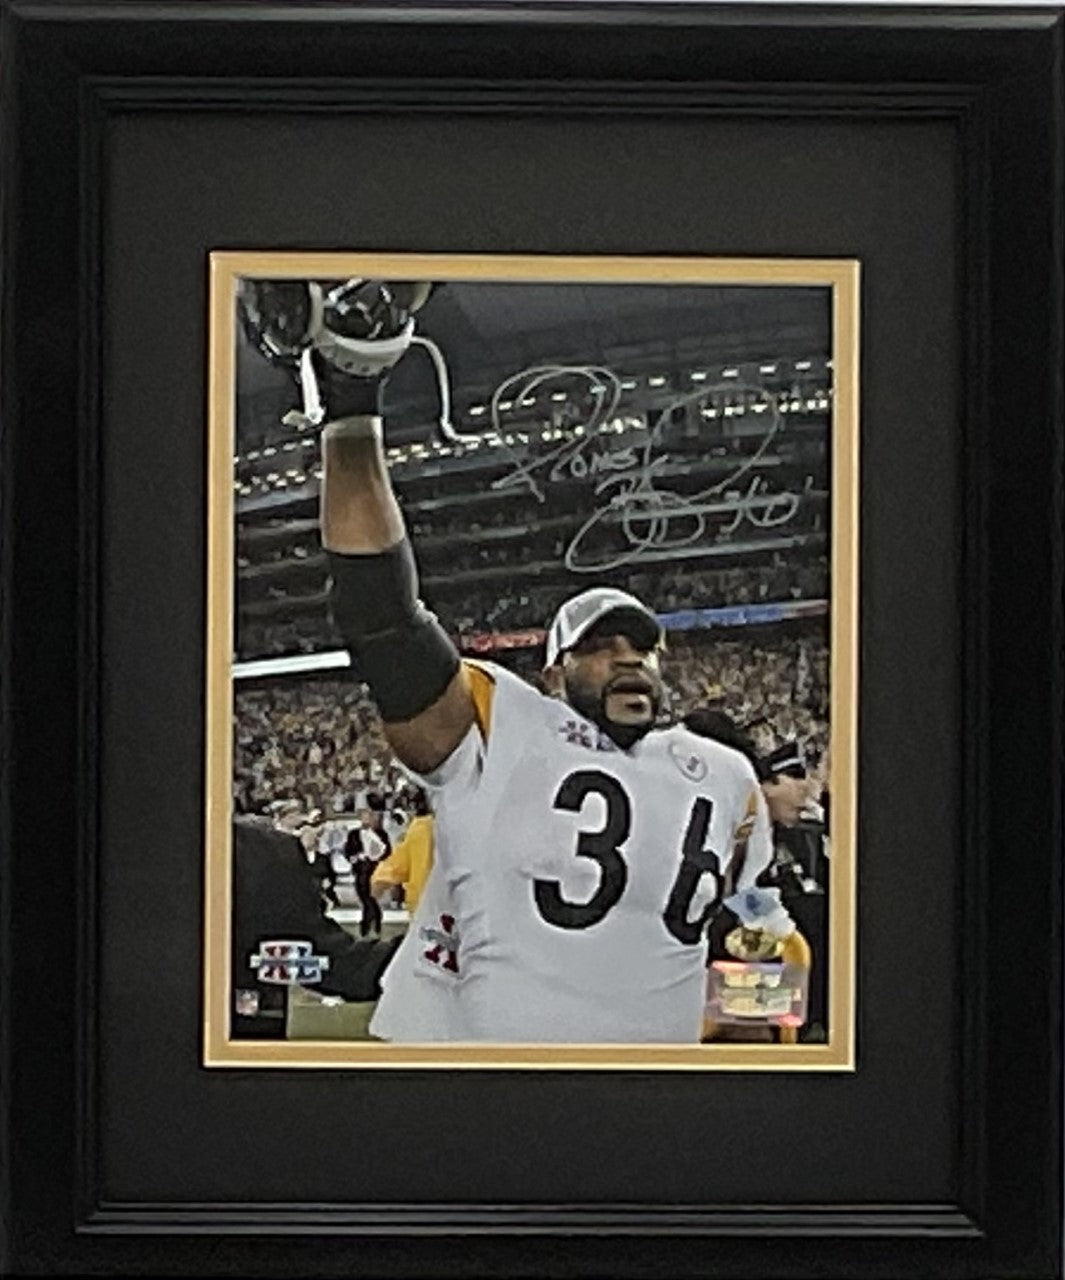 Jerome Bettis Pittsburgh Steelers Autographed 8x10 Photo Framed